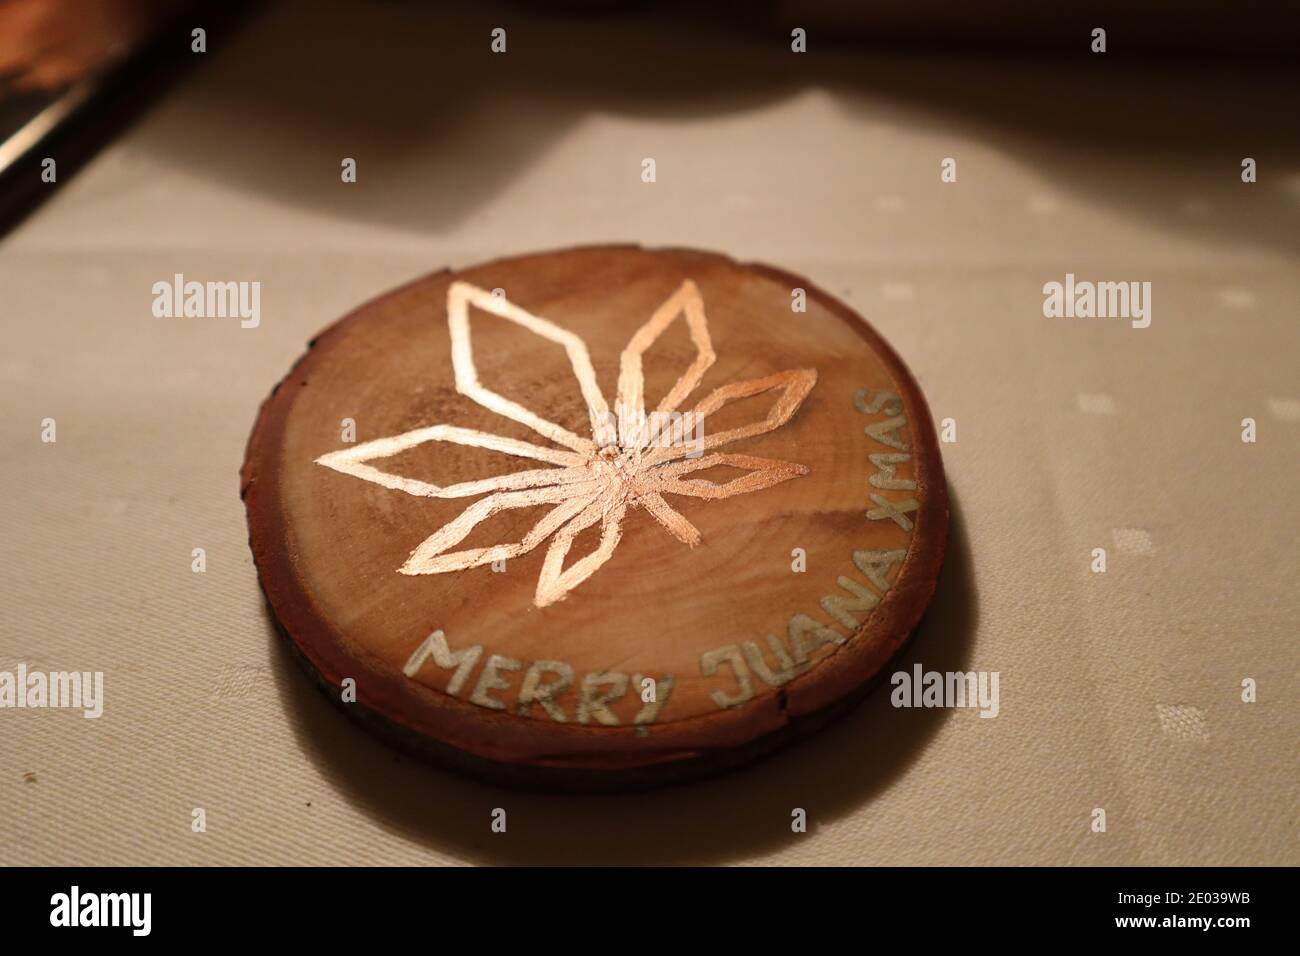 Selfmade wooden coaster on a table with a marijuana leaf in bright colors. The text MERRY JUANA XMAS decorates the coaster. Stock Photo